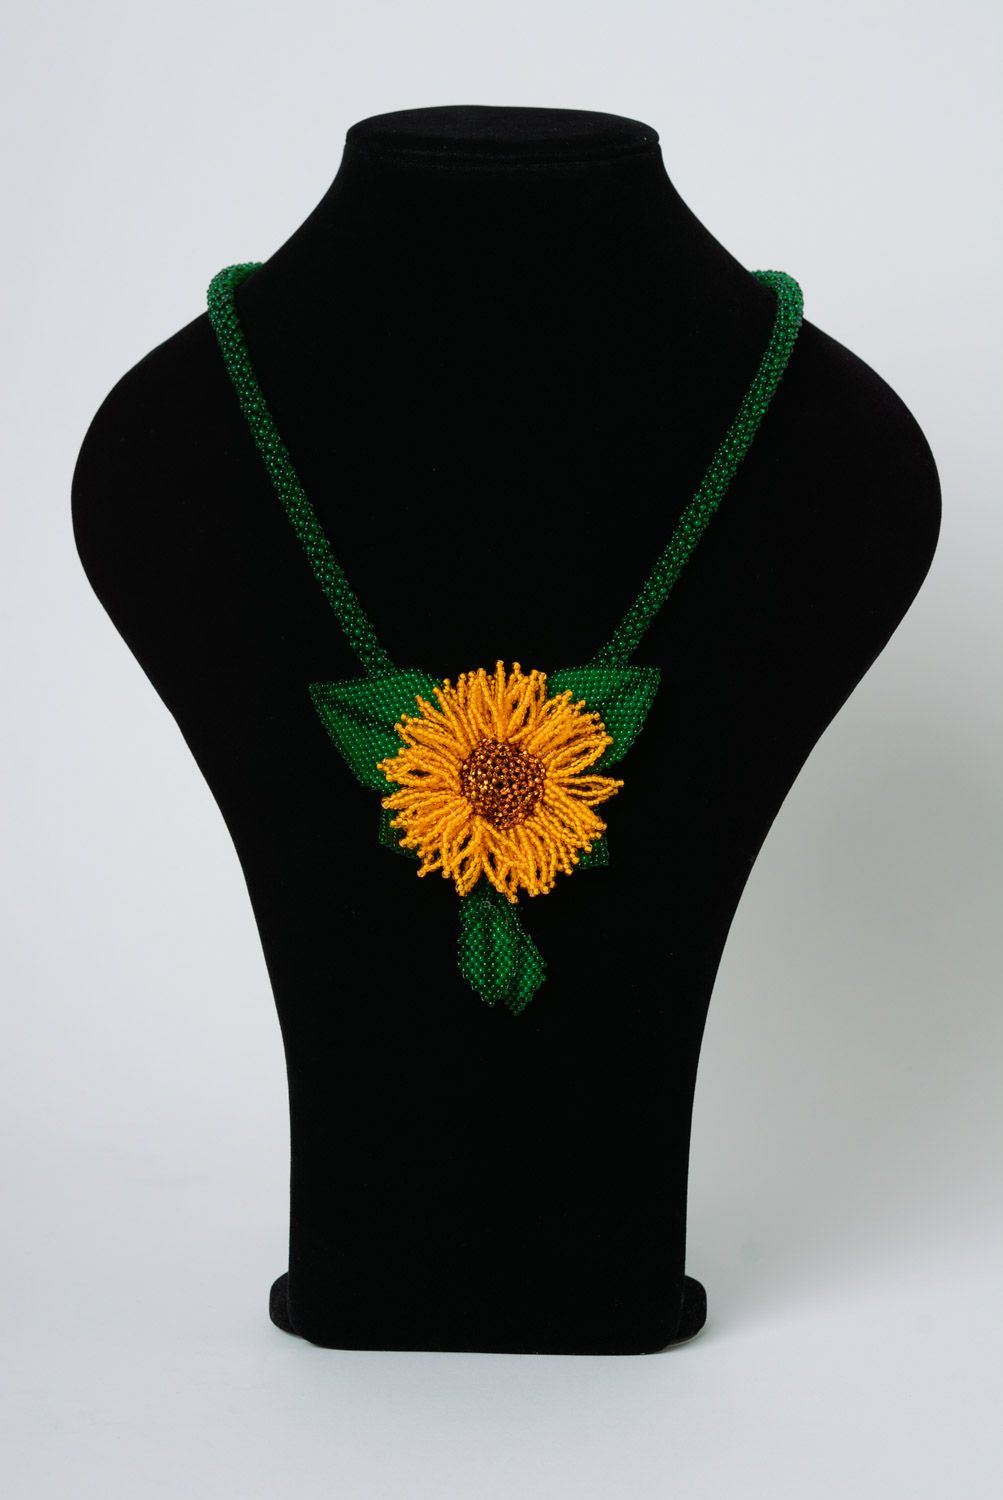 Handmade long beautiful necklace woven of beads in the shape of sunflower photo 2